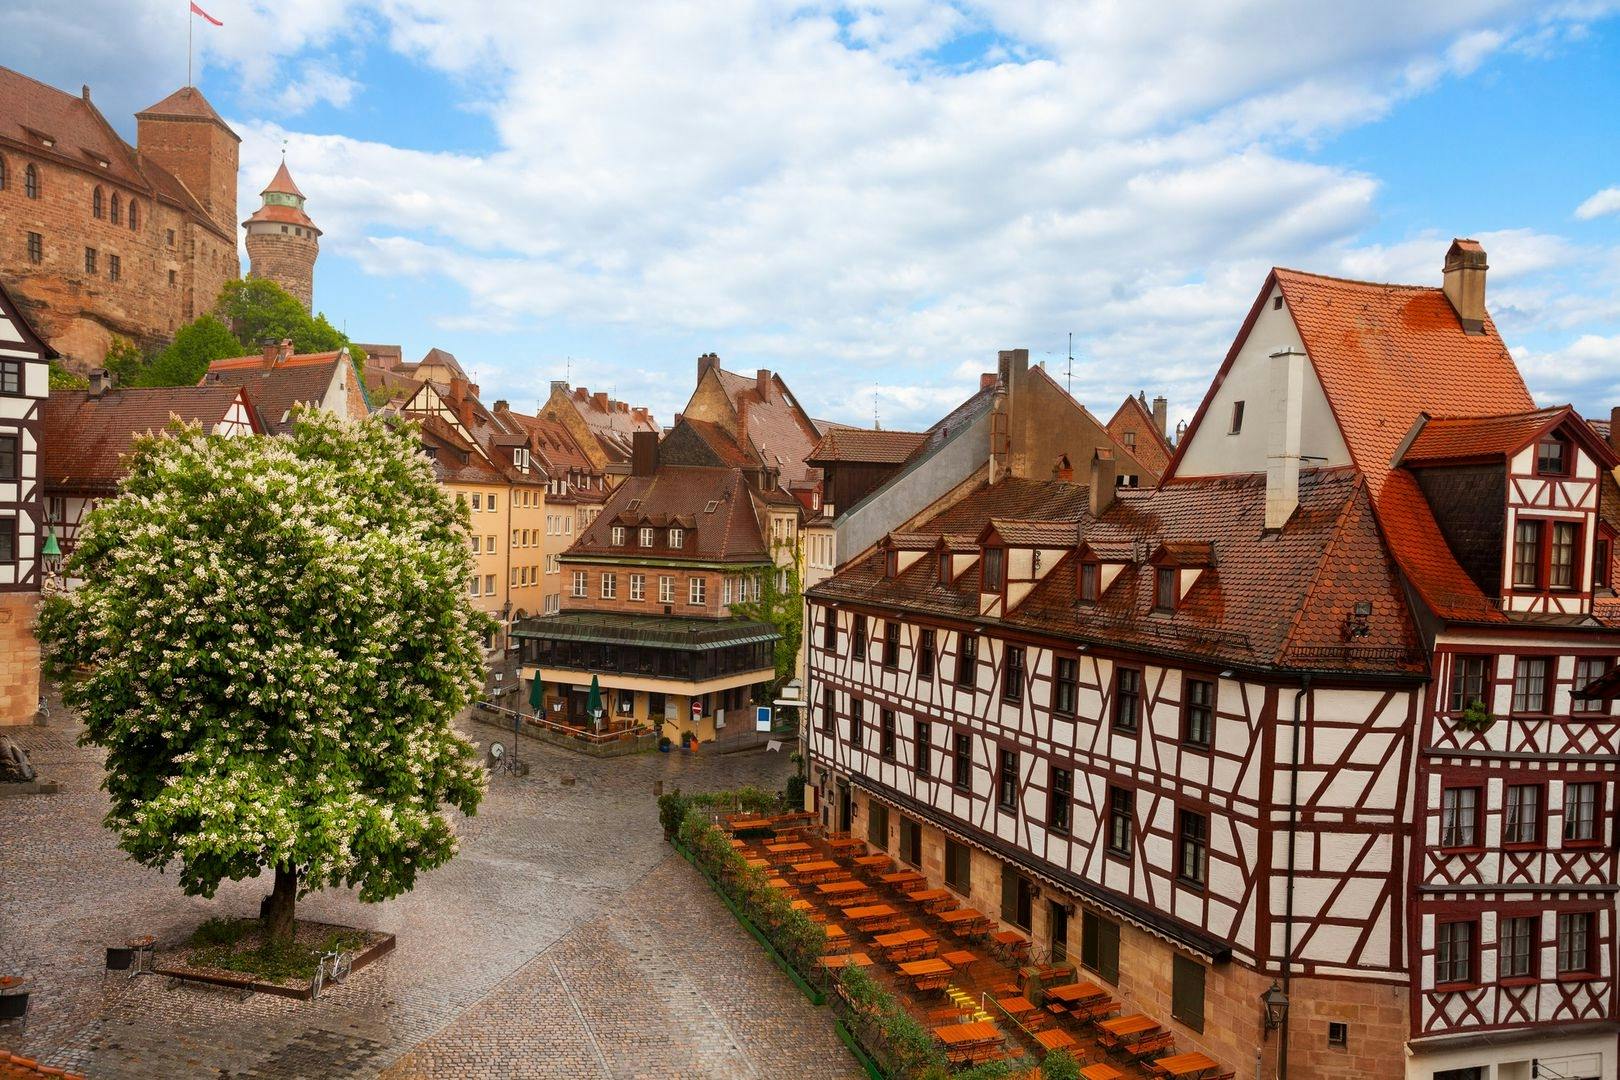 Nuremberg's history, local cuisine and legends self-guided audio tour